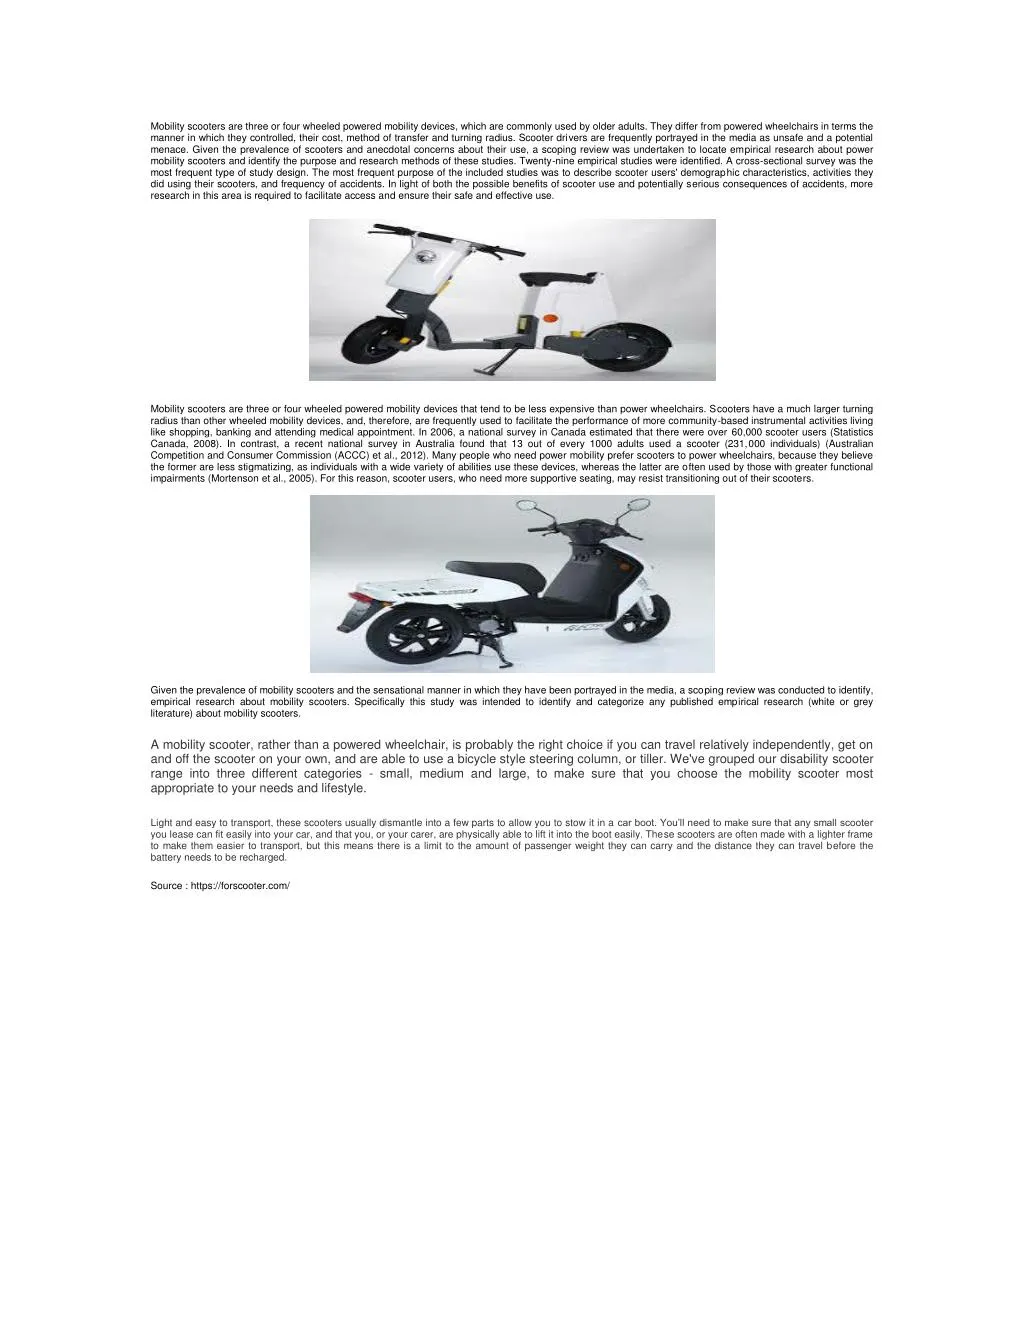 mobility scooters are three or four wheeled